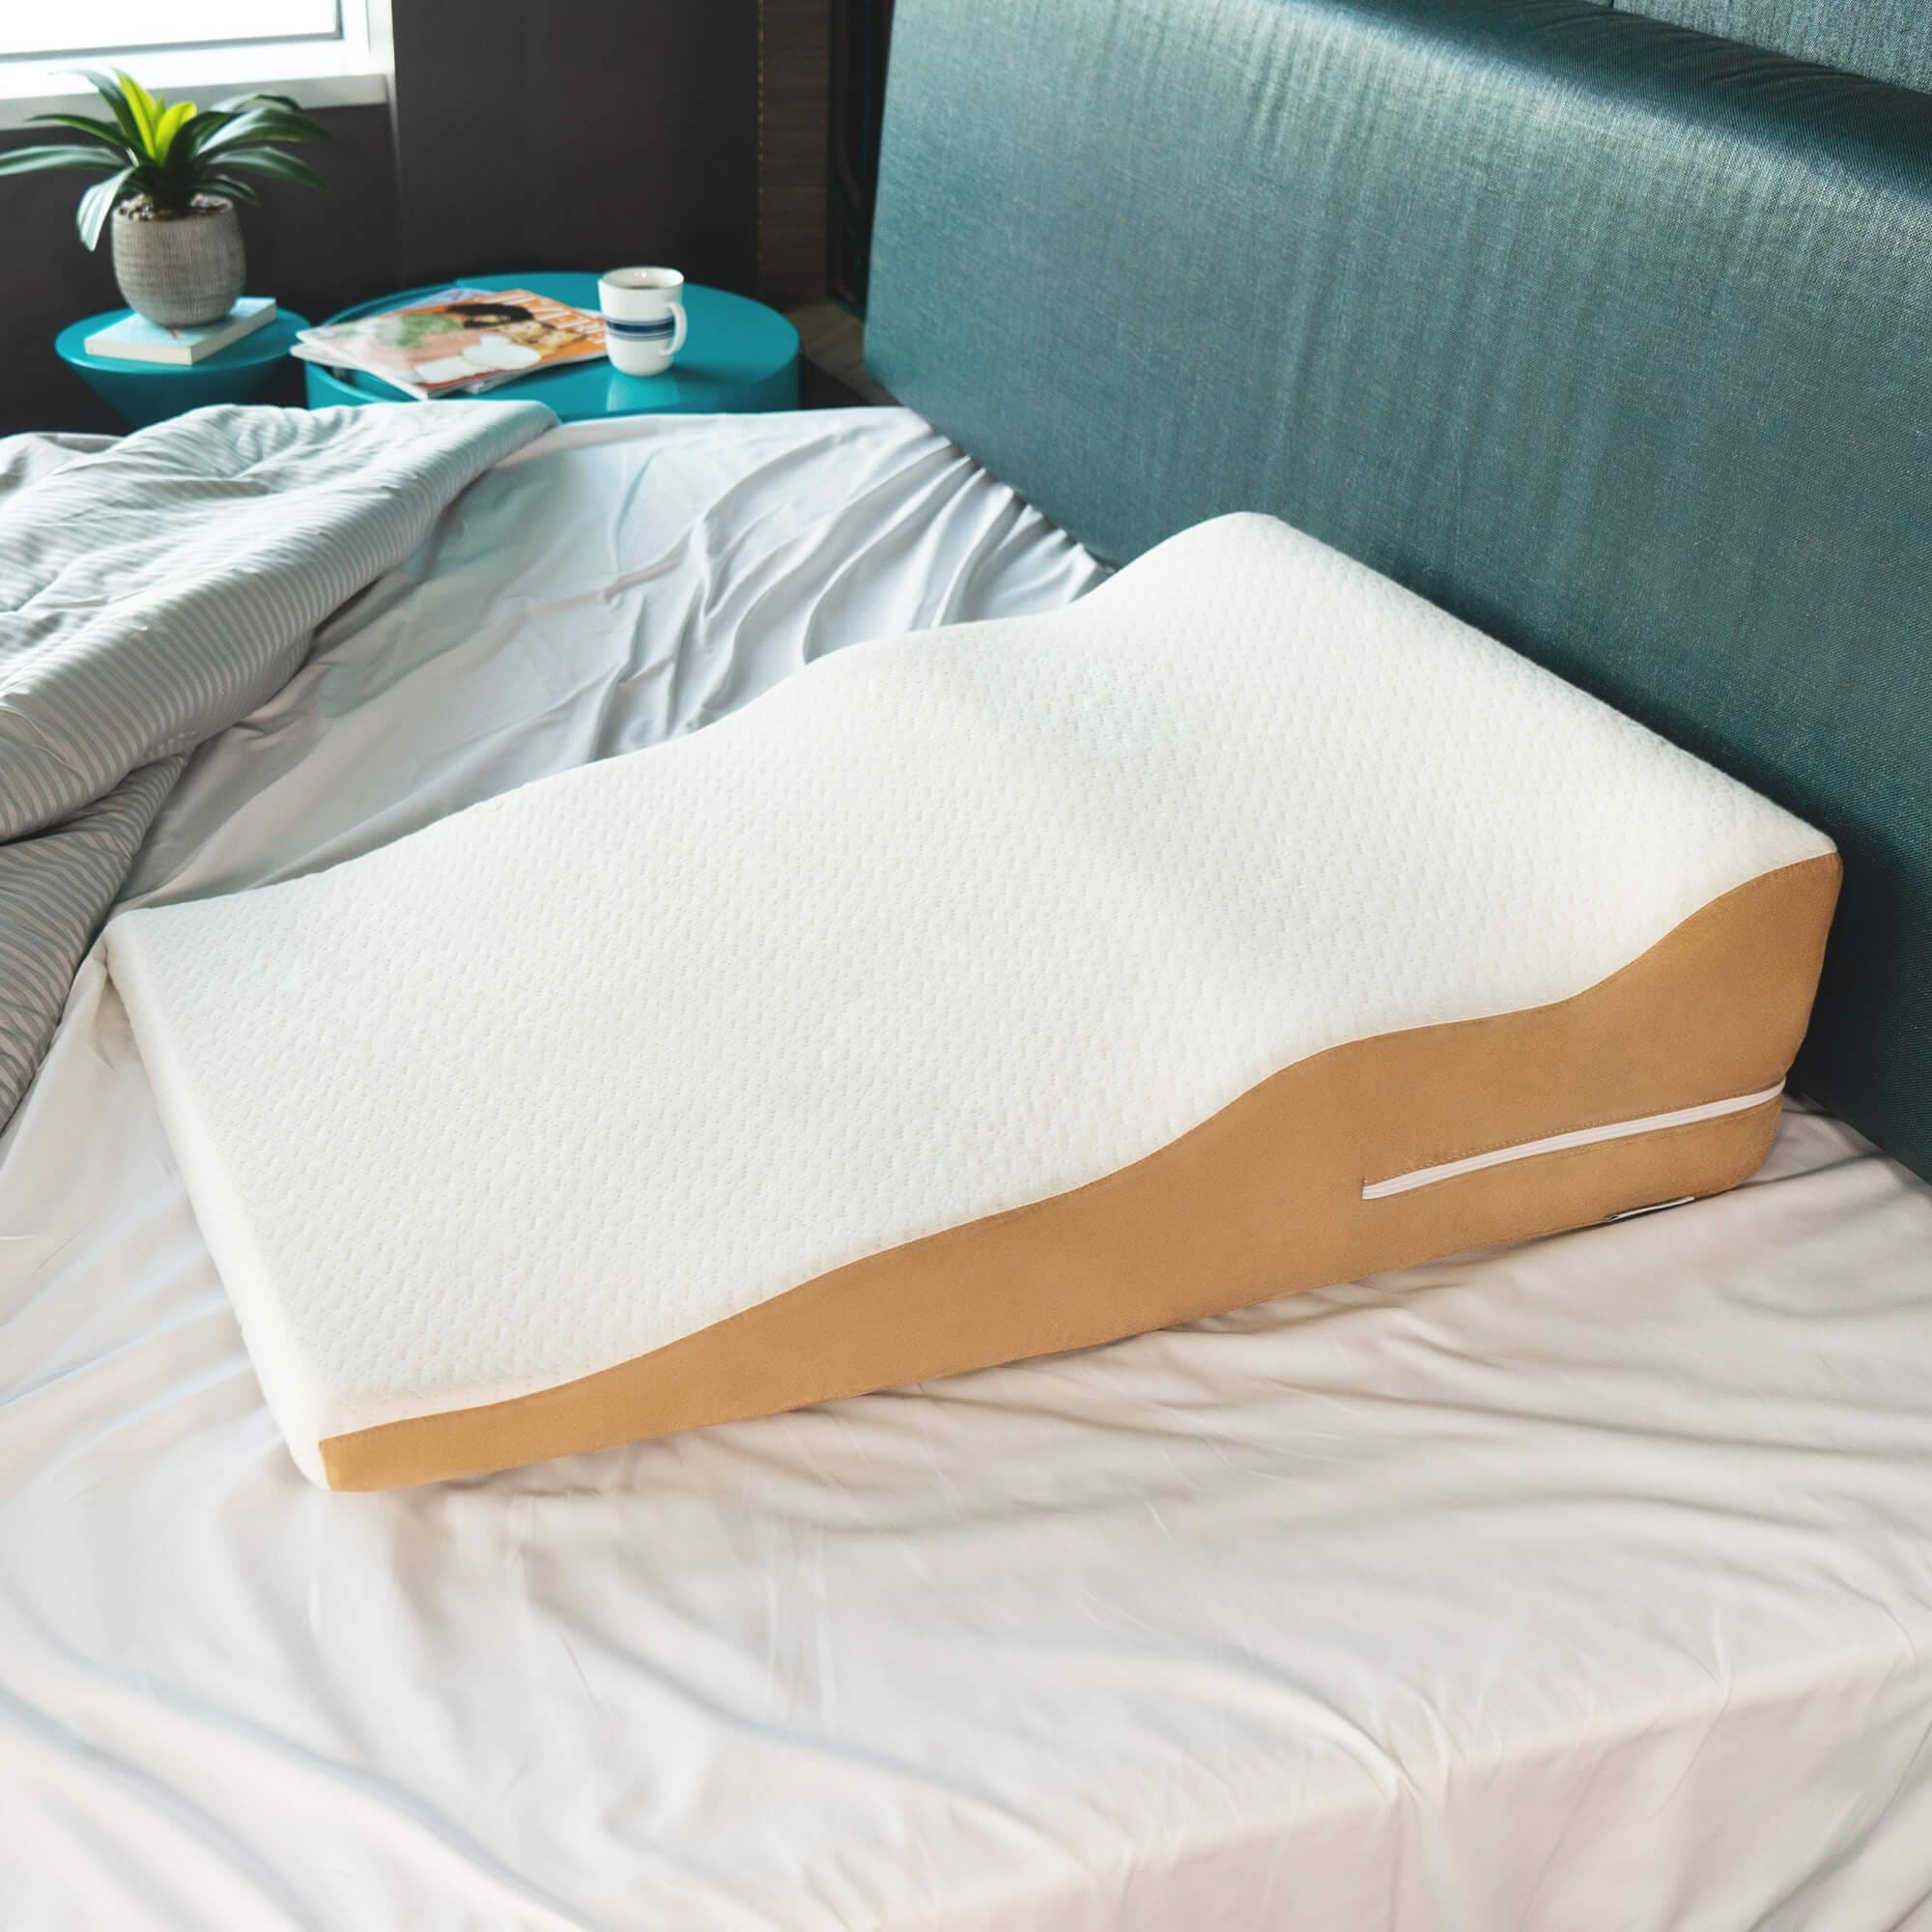 https://ak1.ostkcdn.com/images/products/is/images/direct/49d466f9f9f2634f34f94e81f4f3da401b4aa647/Avana-Contoured-Support-Memory-Foam-Wedge-Pillow.jpg